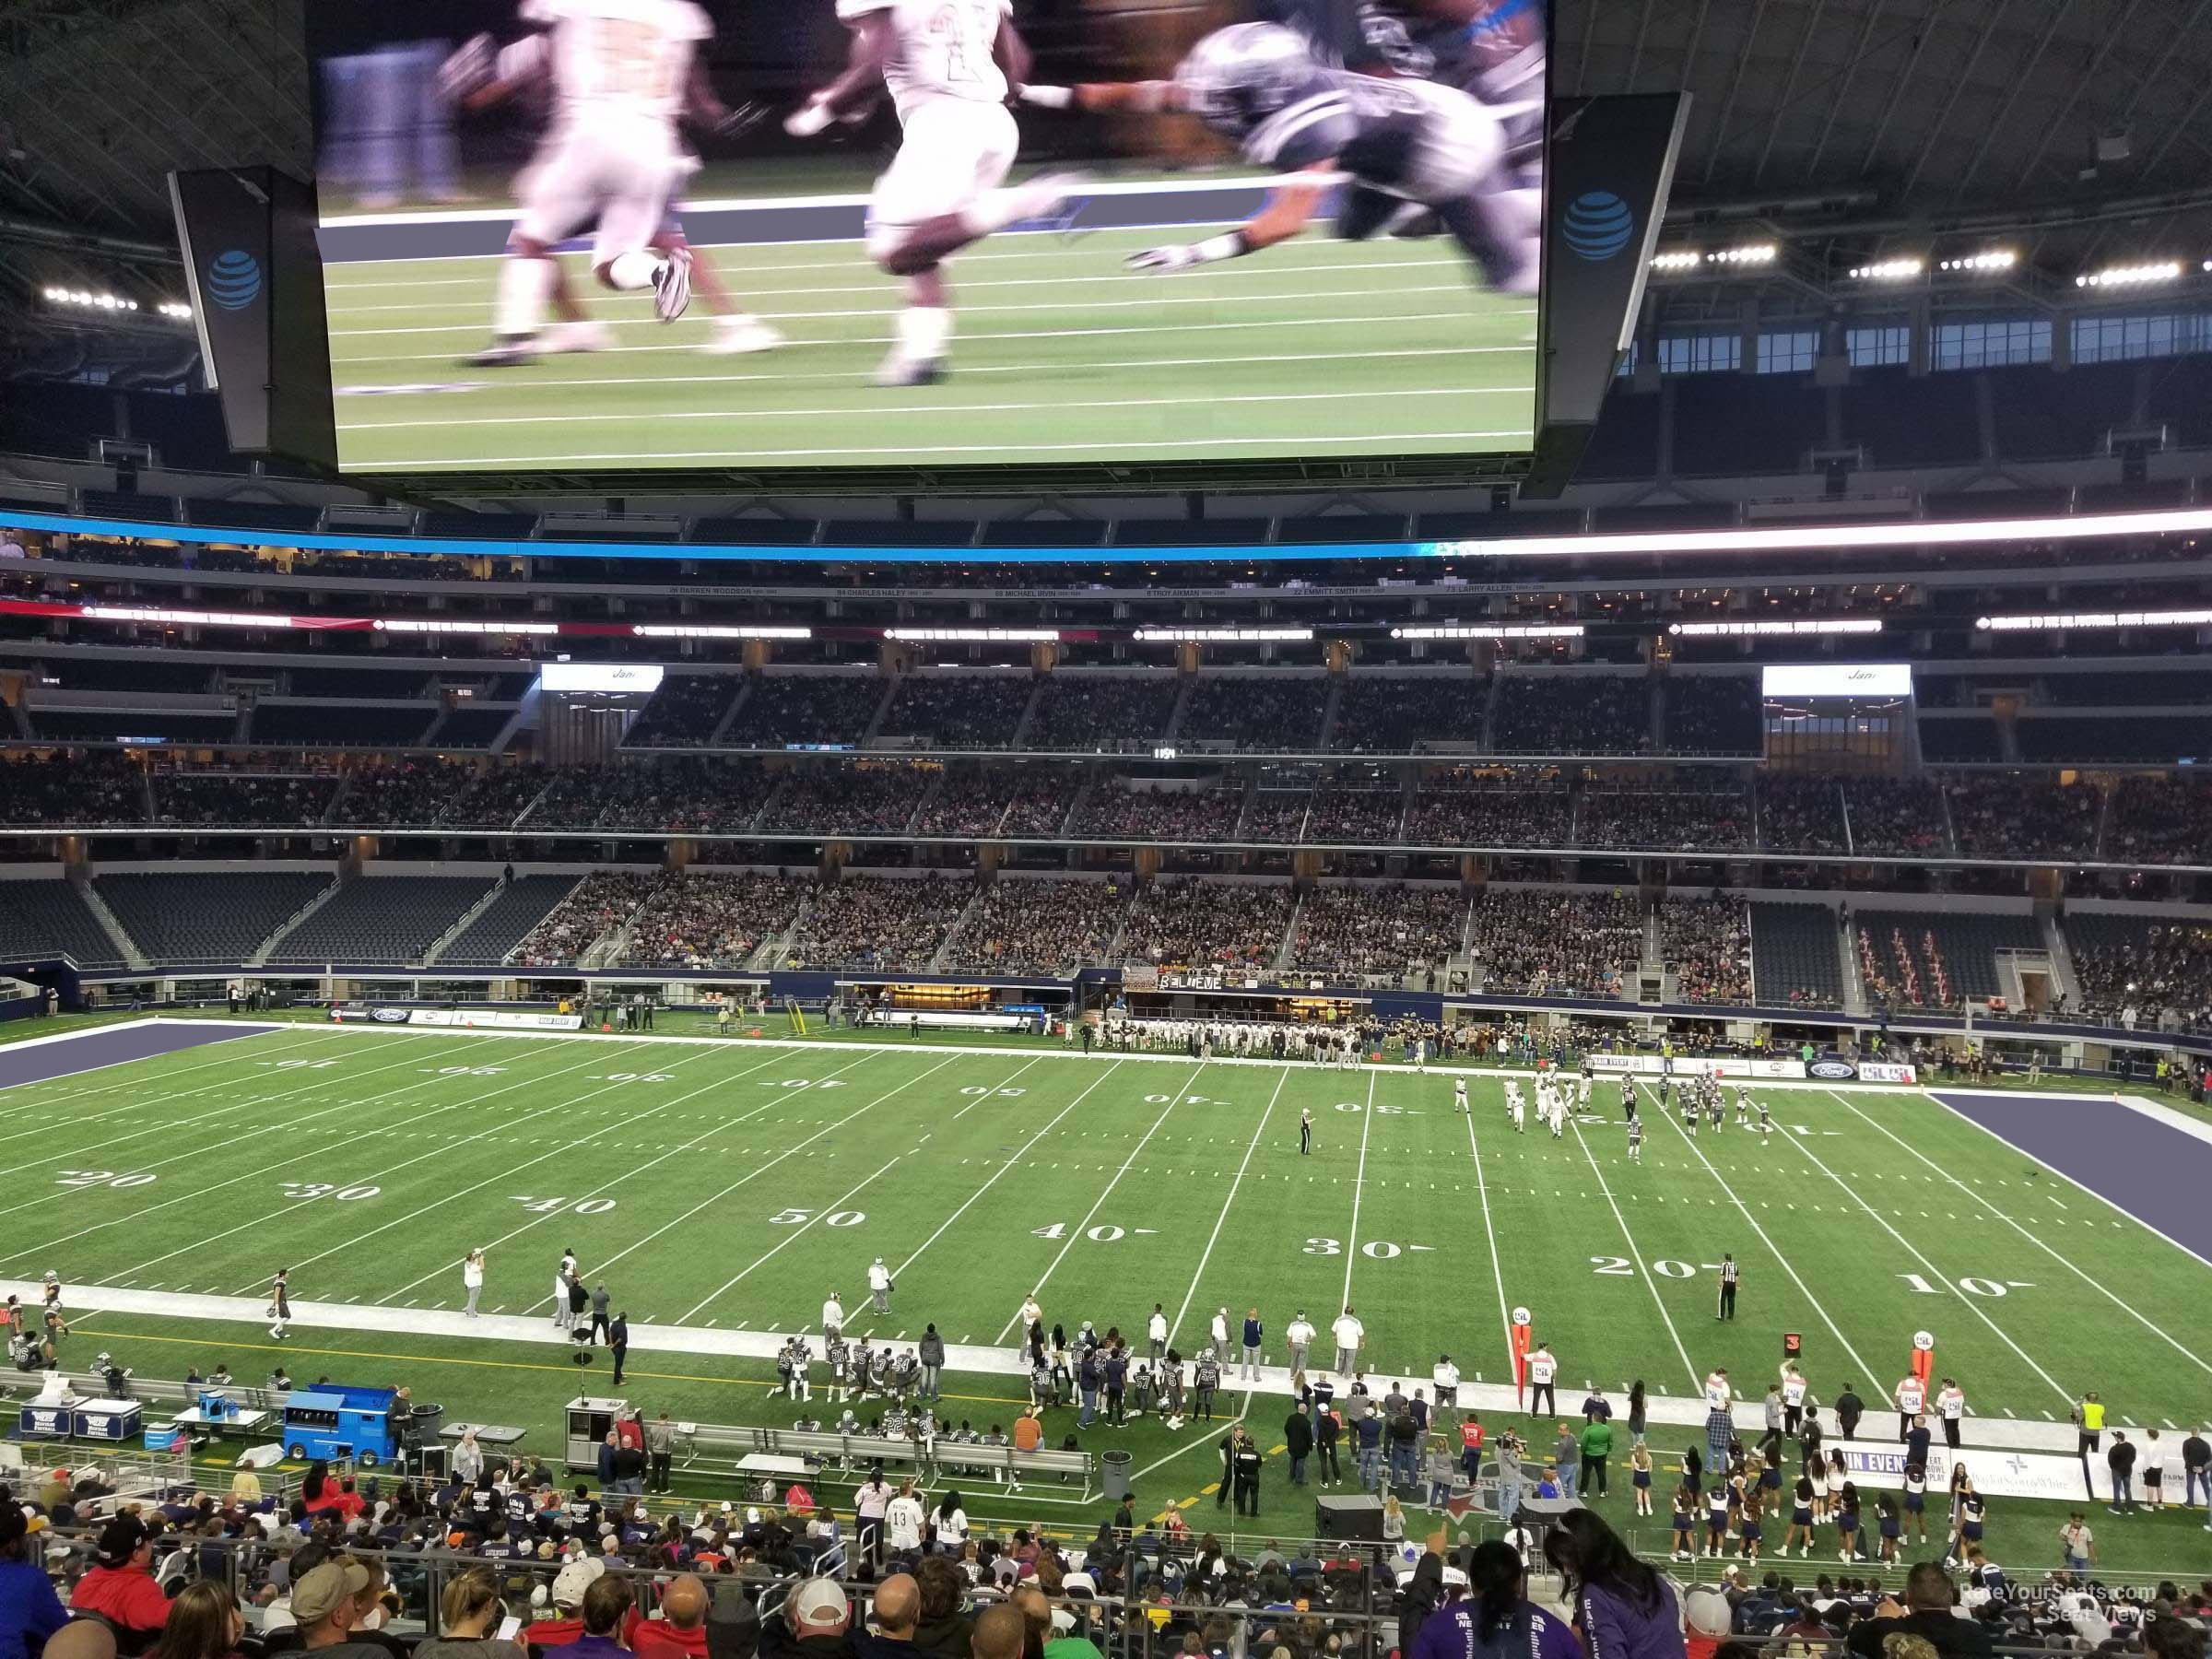 section c208, row 10 seat view  for football - at&t stadium (cowboys stadium)